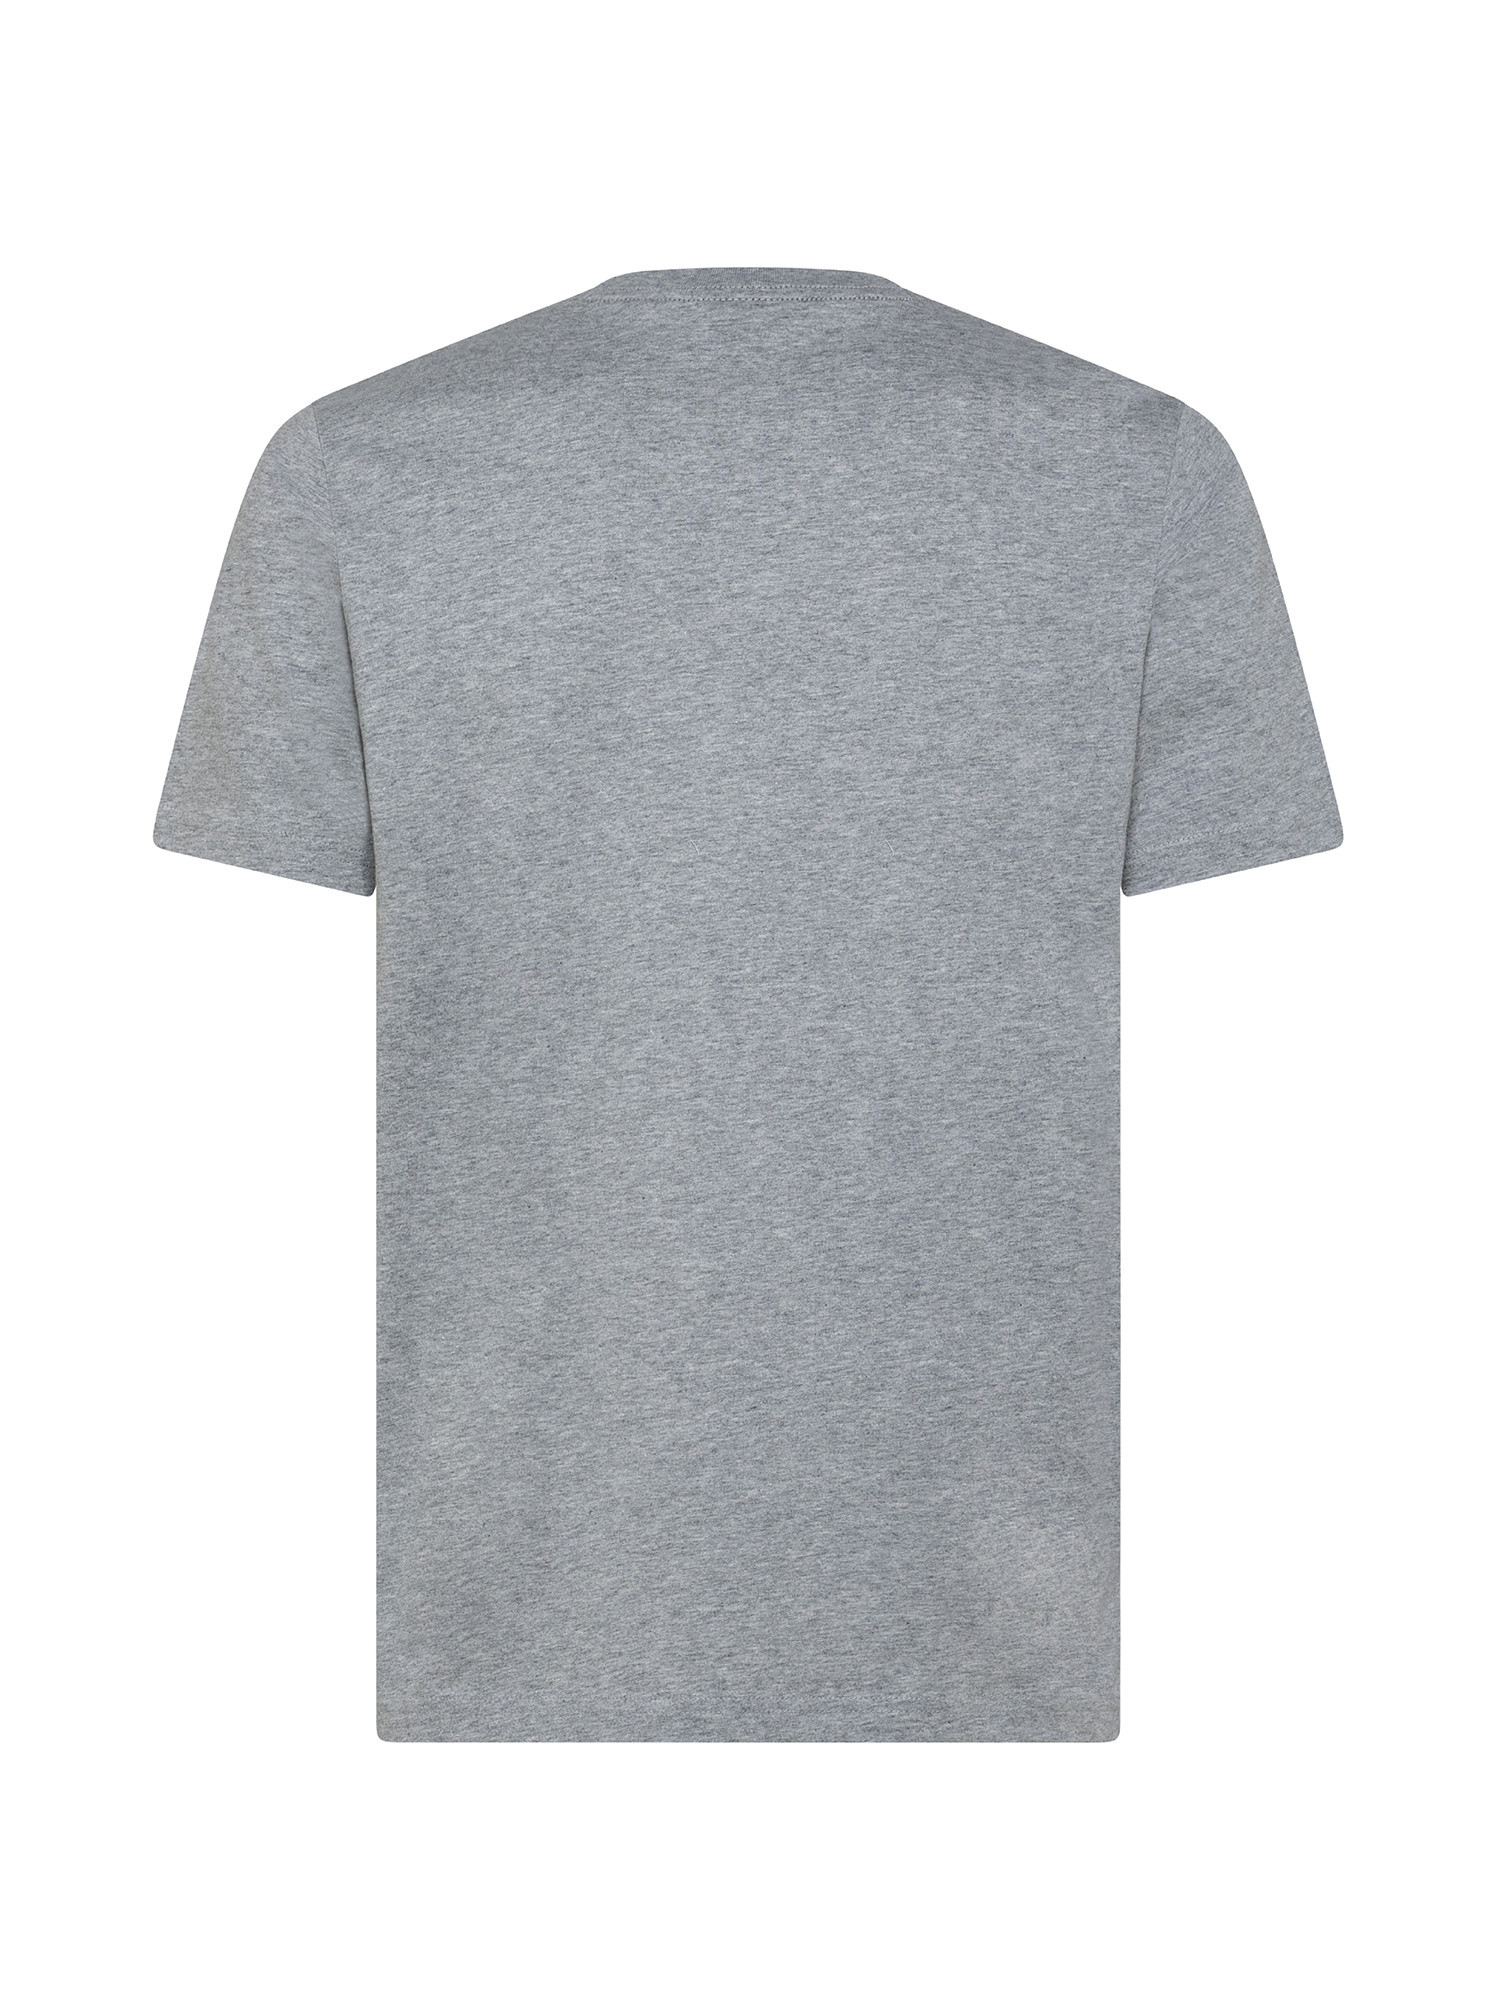 T-shirt con stampa teschio, Grigio, large image number 1